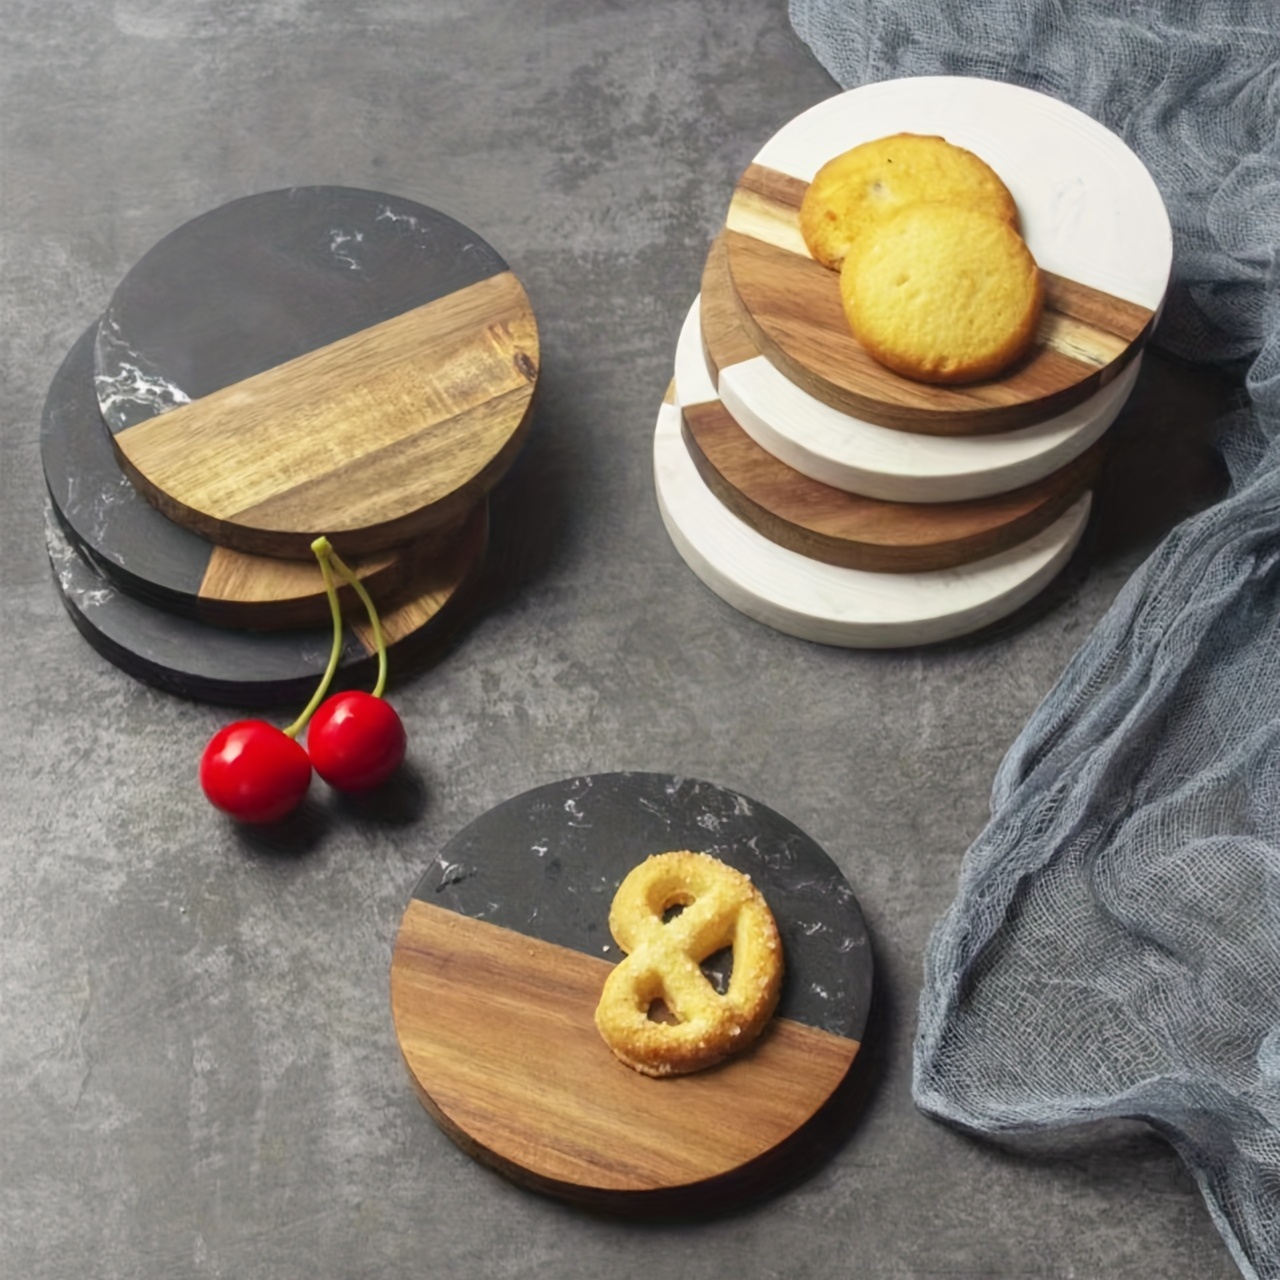 Wooden Coasters for Drinks - Natural Wood Drink Coasters Set with Holder  for Modern Home Decor,Coasters for Coffee Table Tabletop Protection for Any